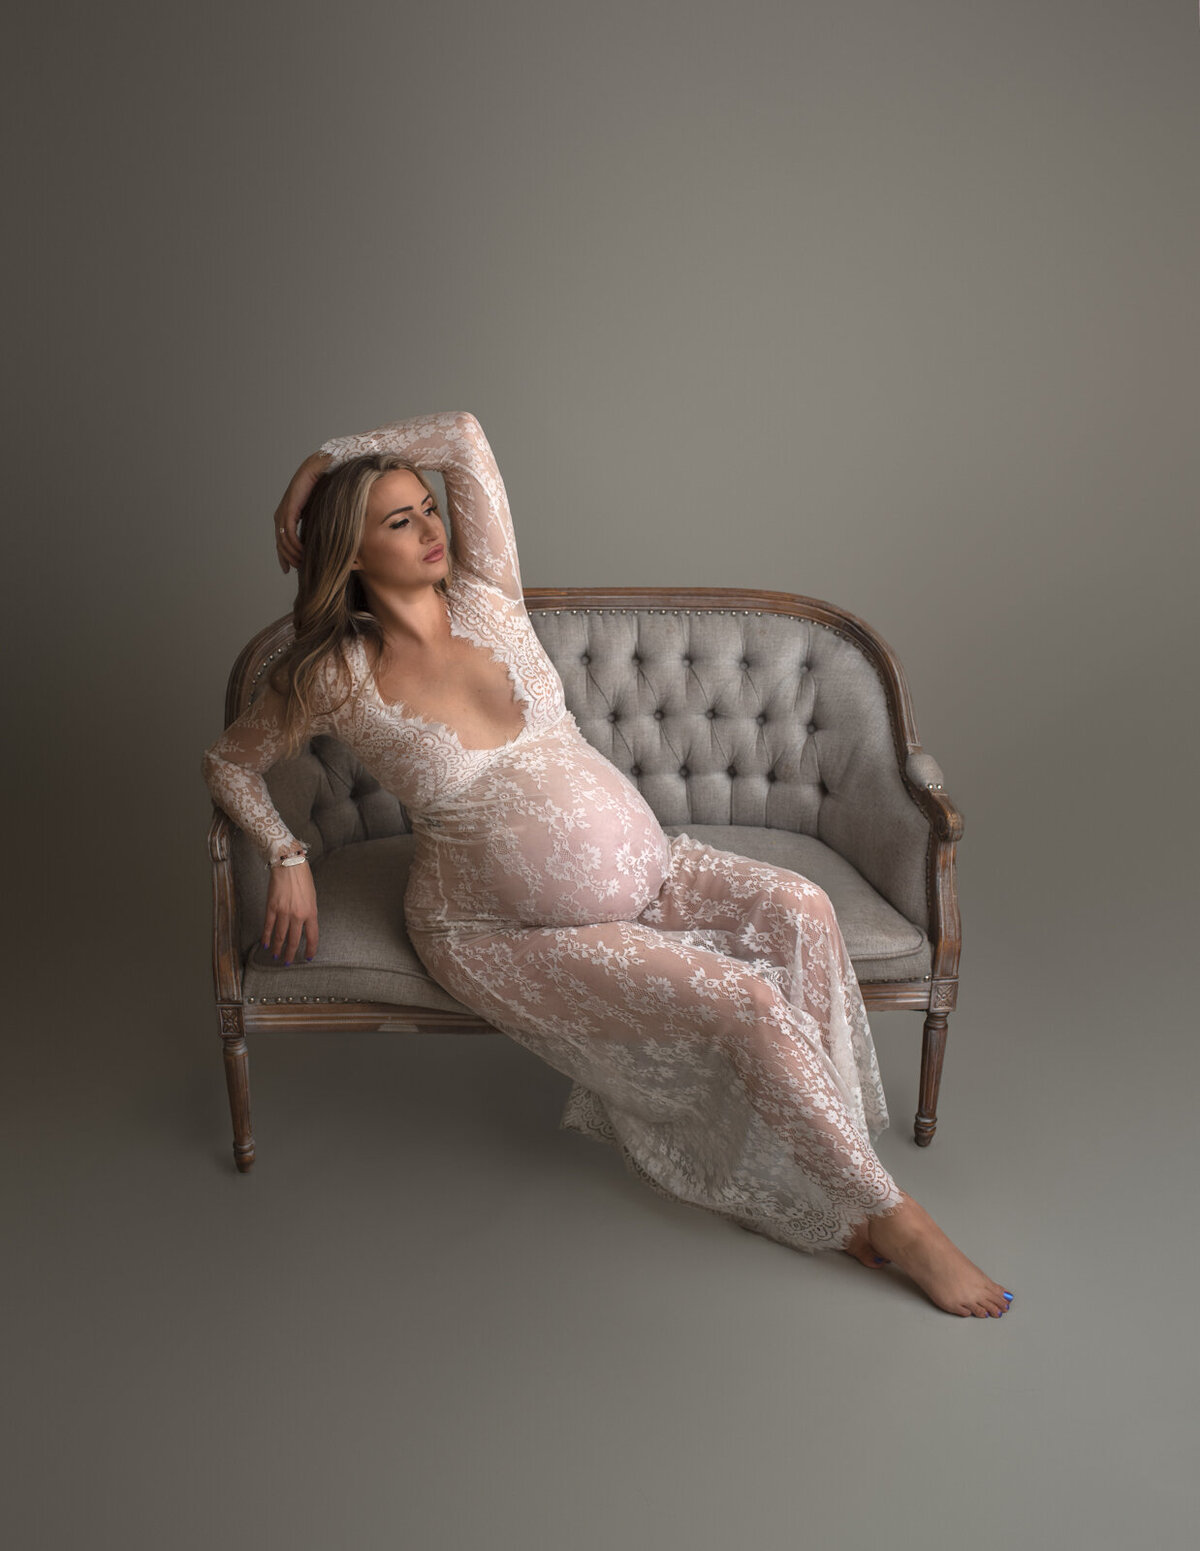 pregnant mom on couch in lace dress